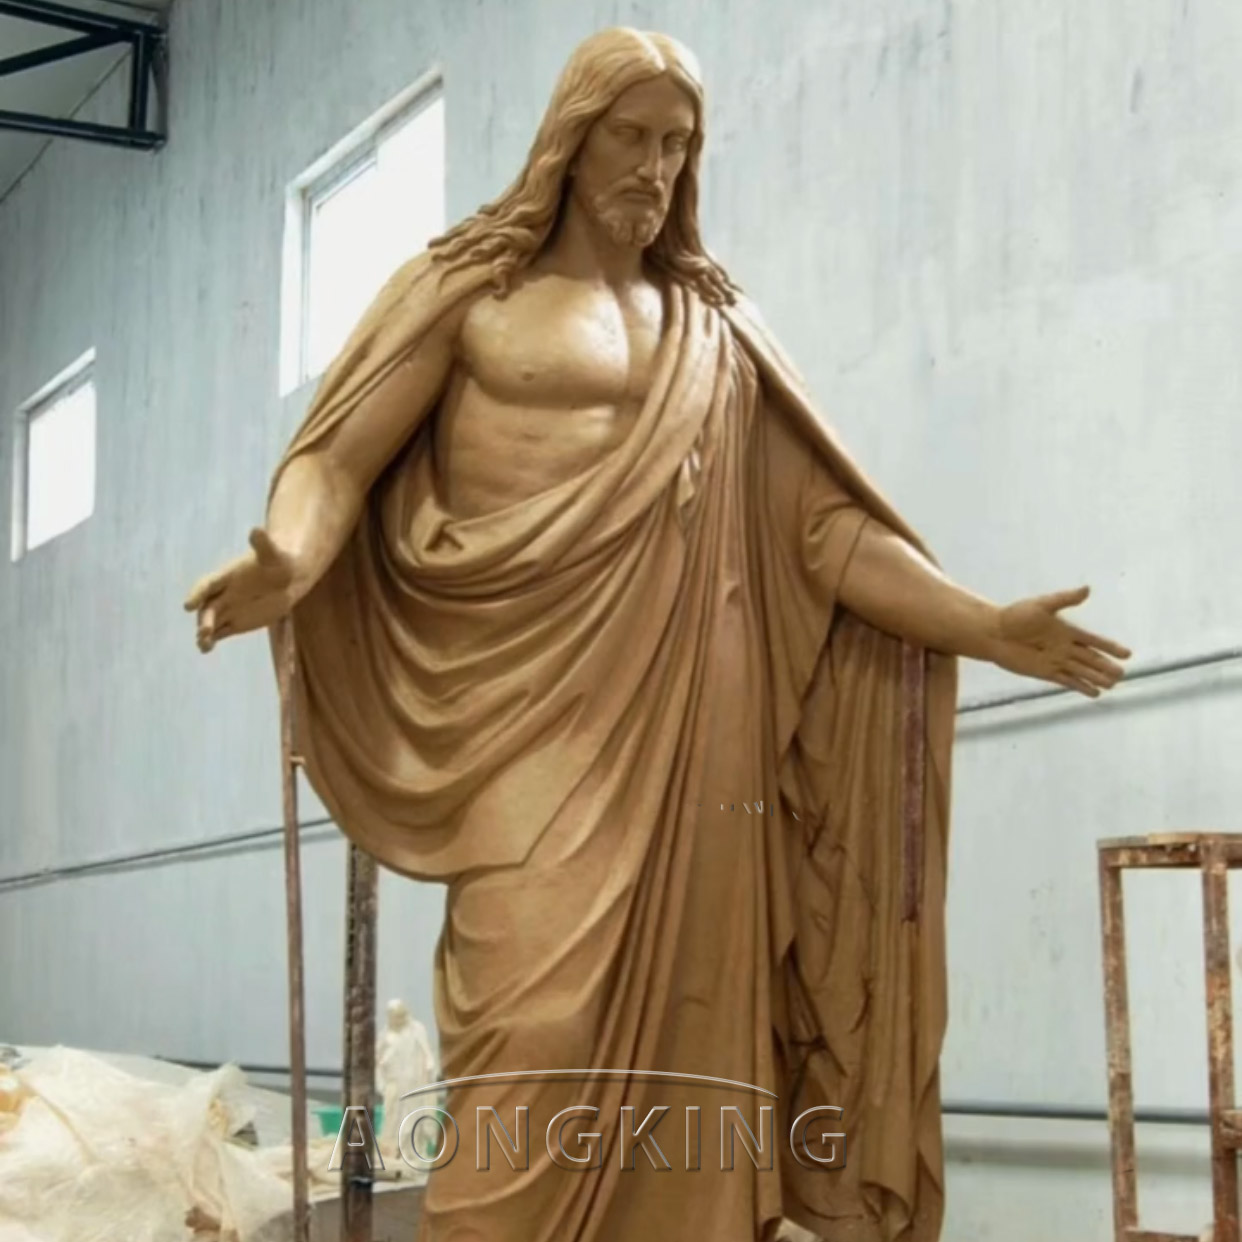 create clay Jesus statue from Aongking